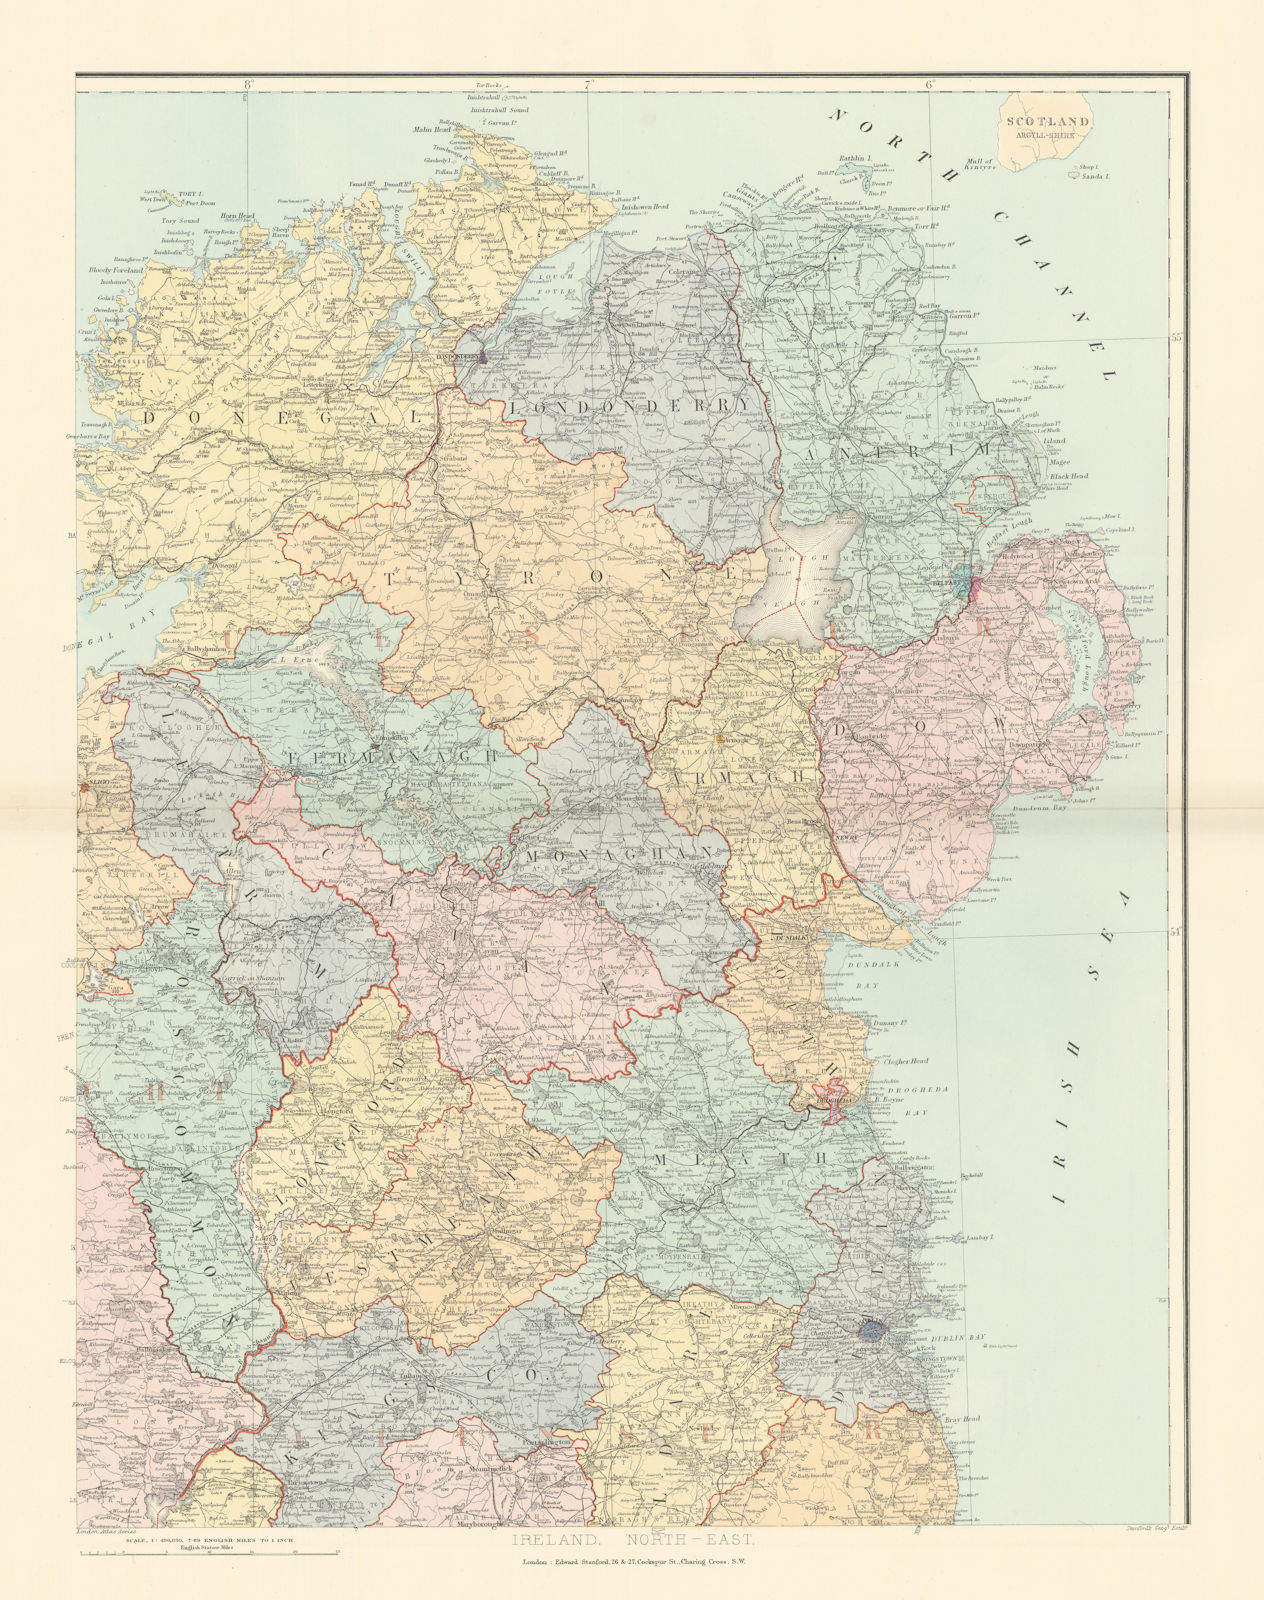 Ireland north-east Ulster Down Antrim Armagh Londonderry &c. STANFORD 1896 map